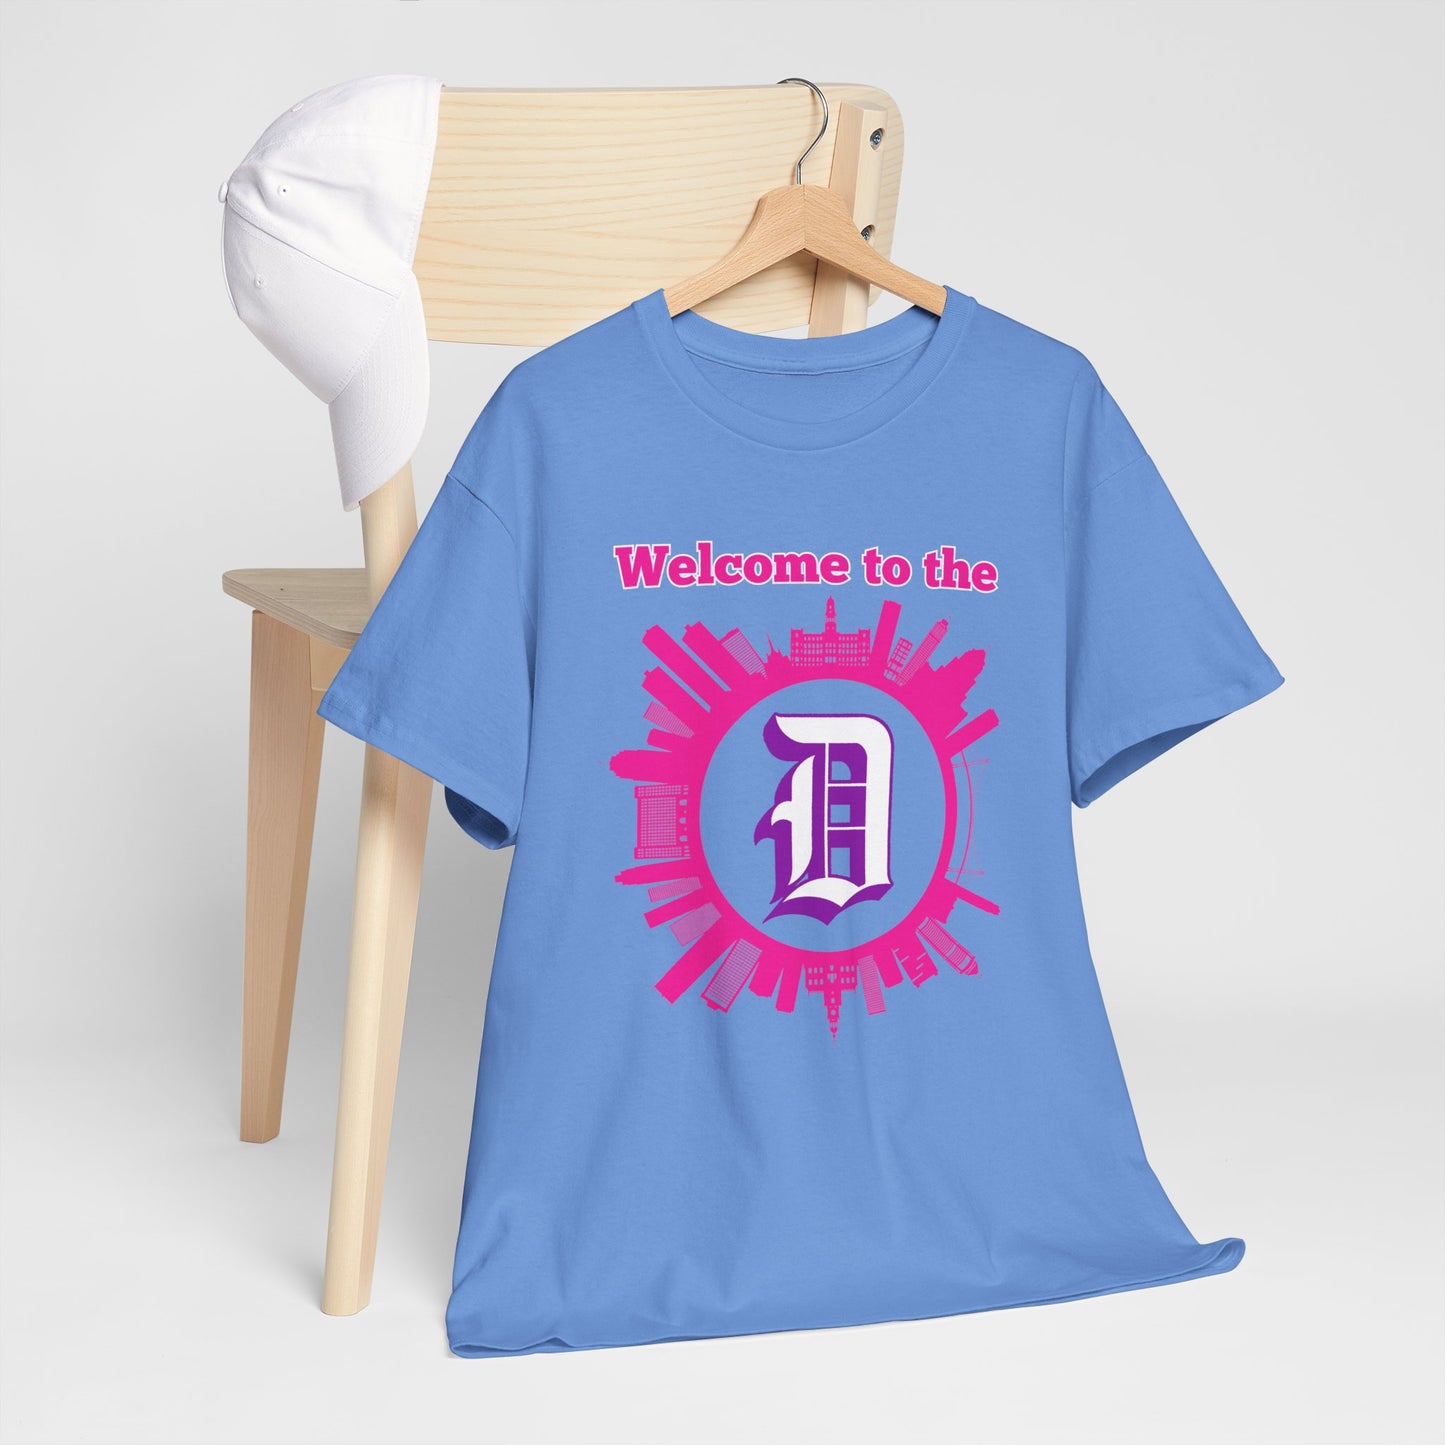 Unisex Heavy Cotton Graphic Design (Welcome to the D) T-shirt